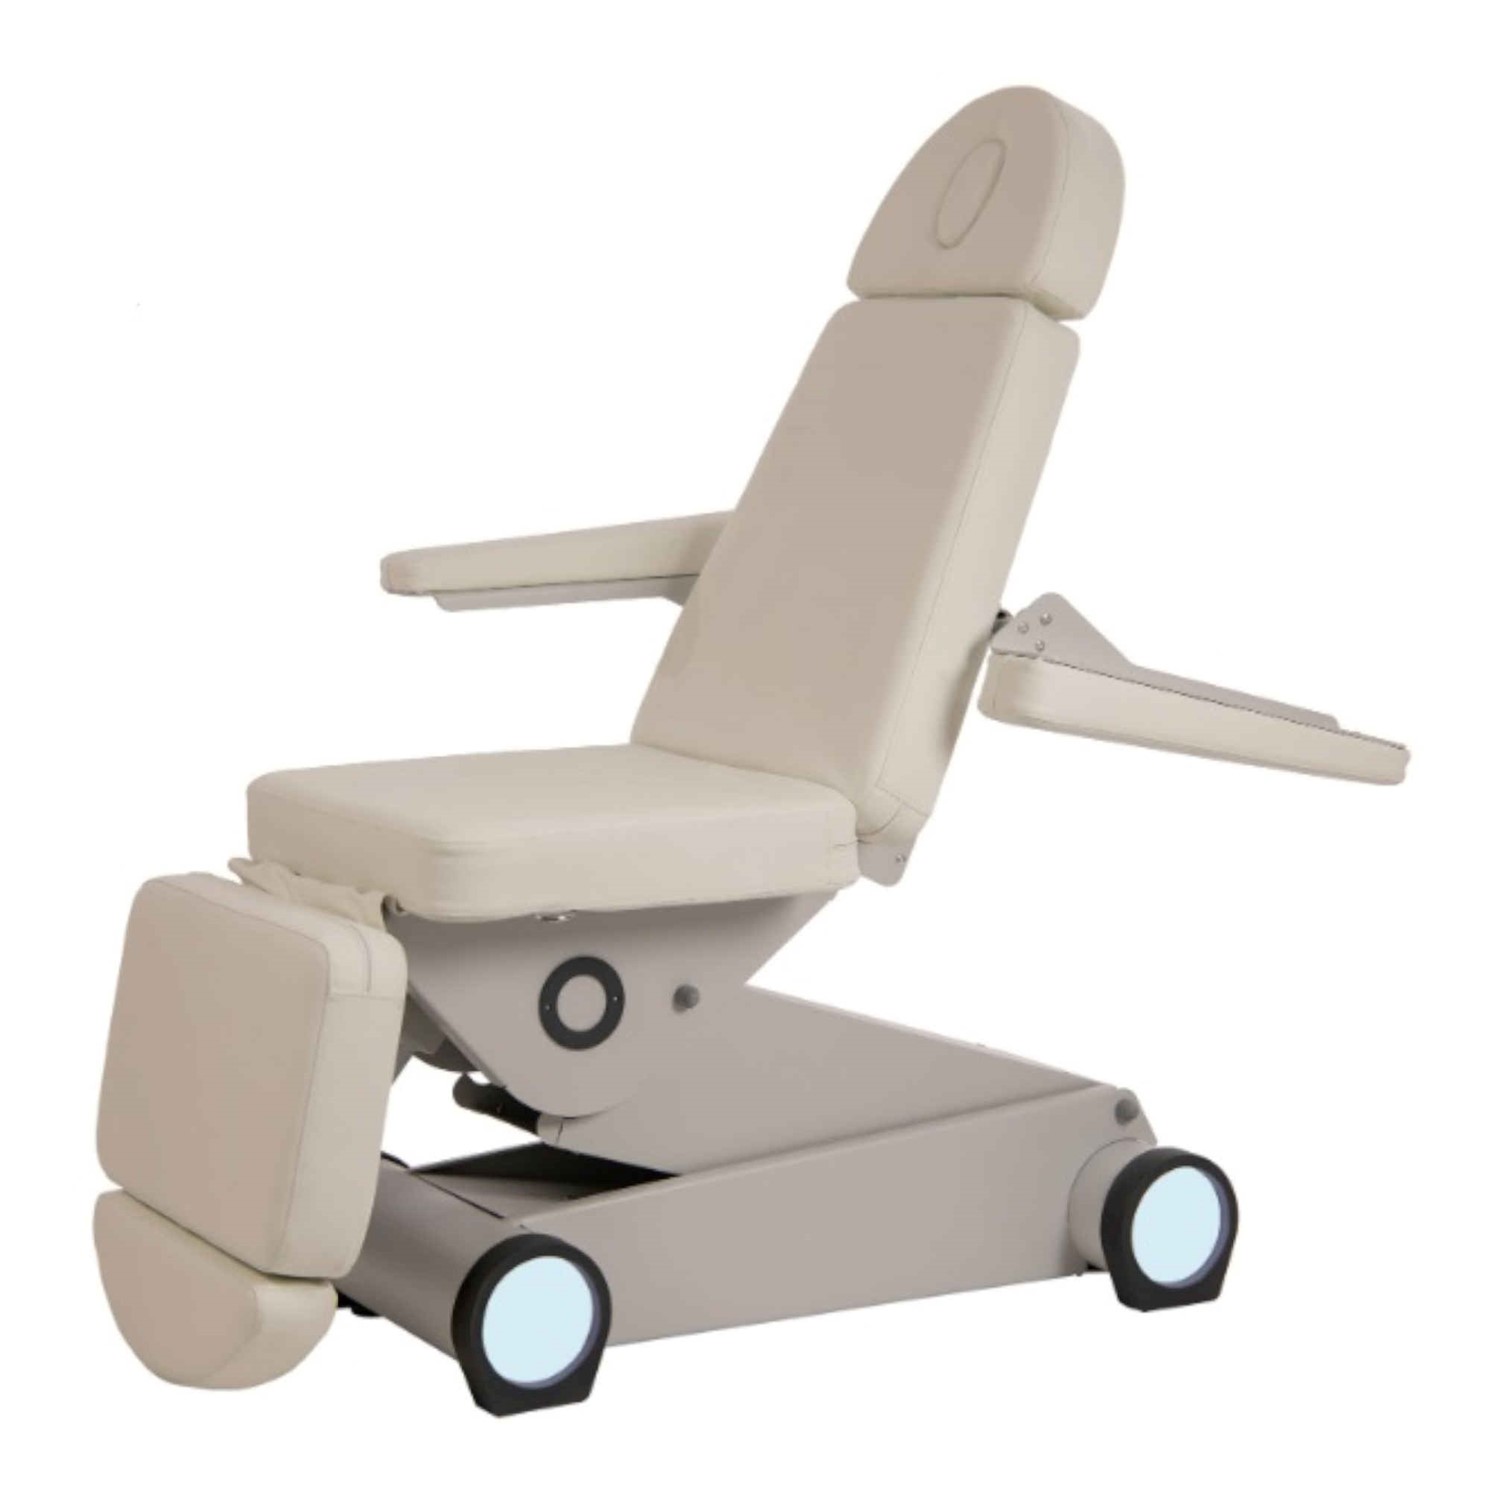 Electric beauty chair with 4 Motors, breather hole and built-in white LED lighting B-Light